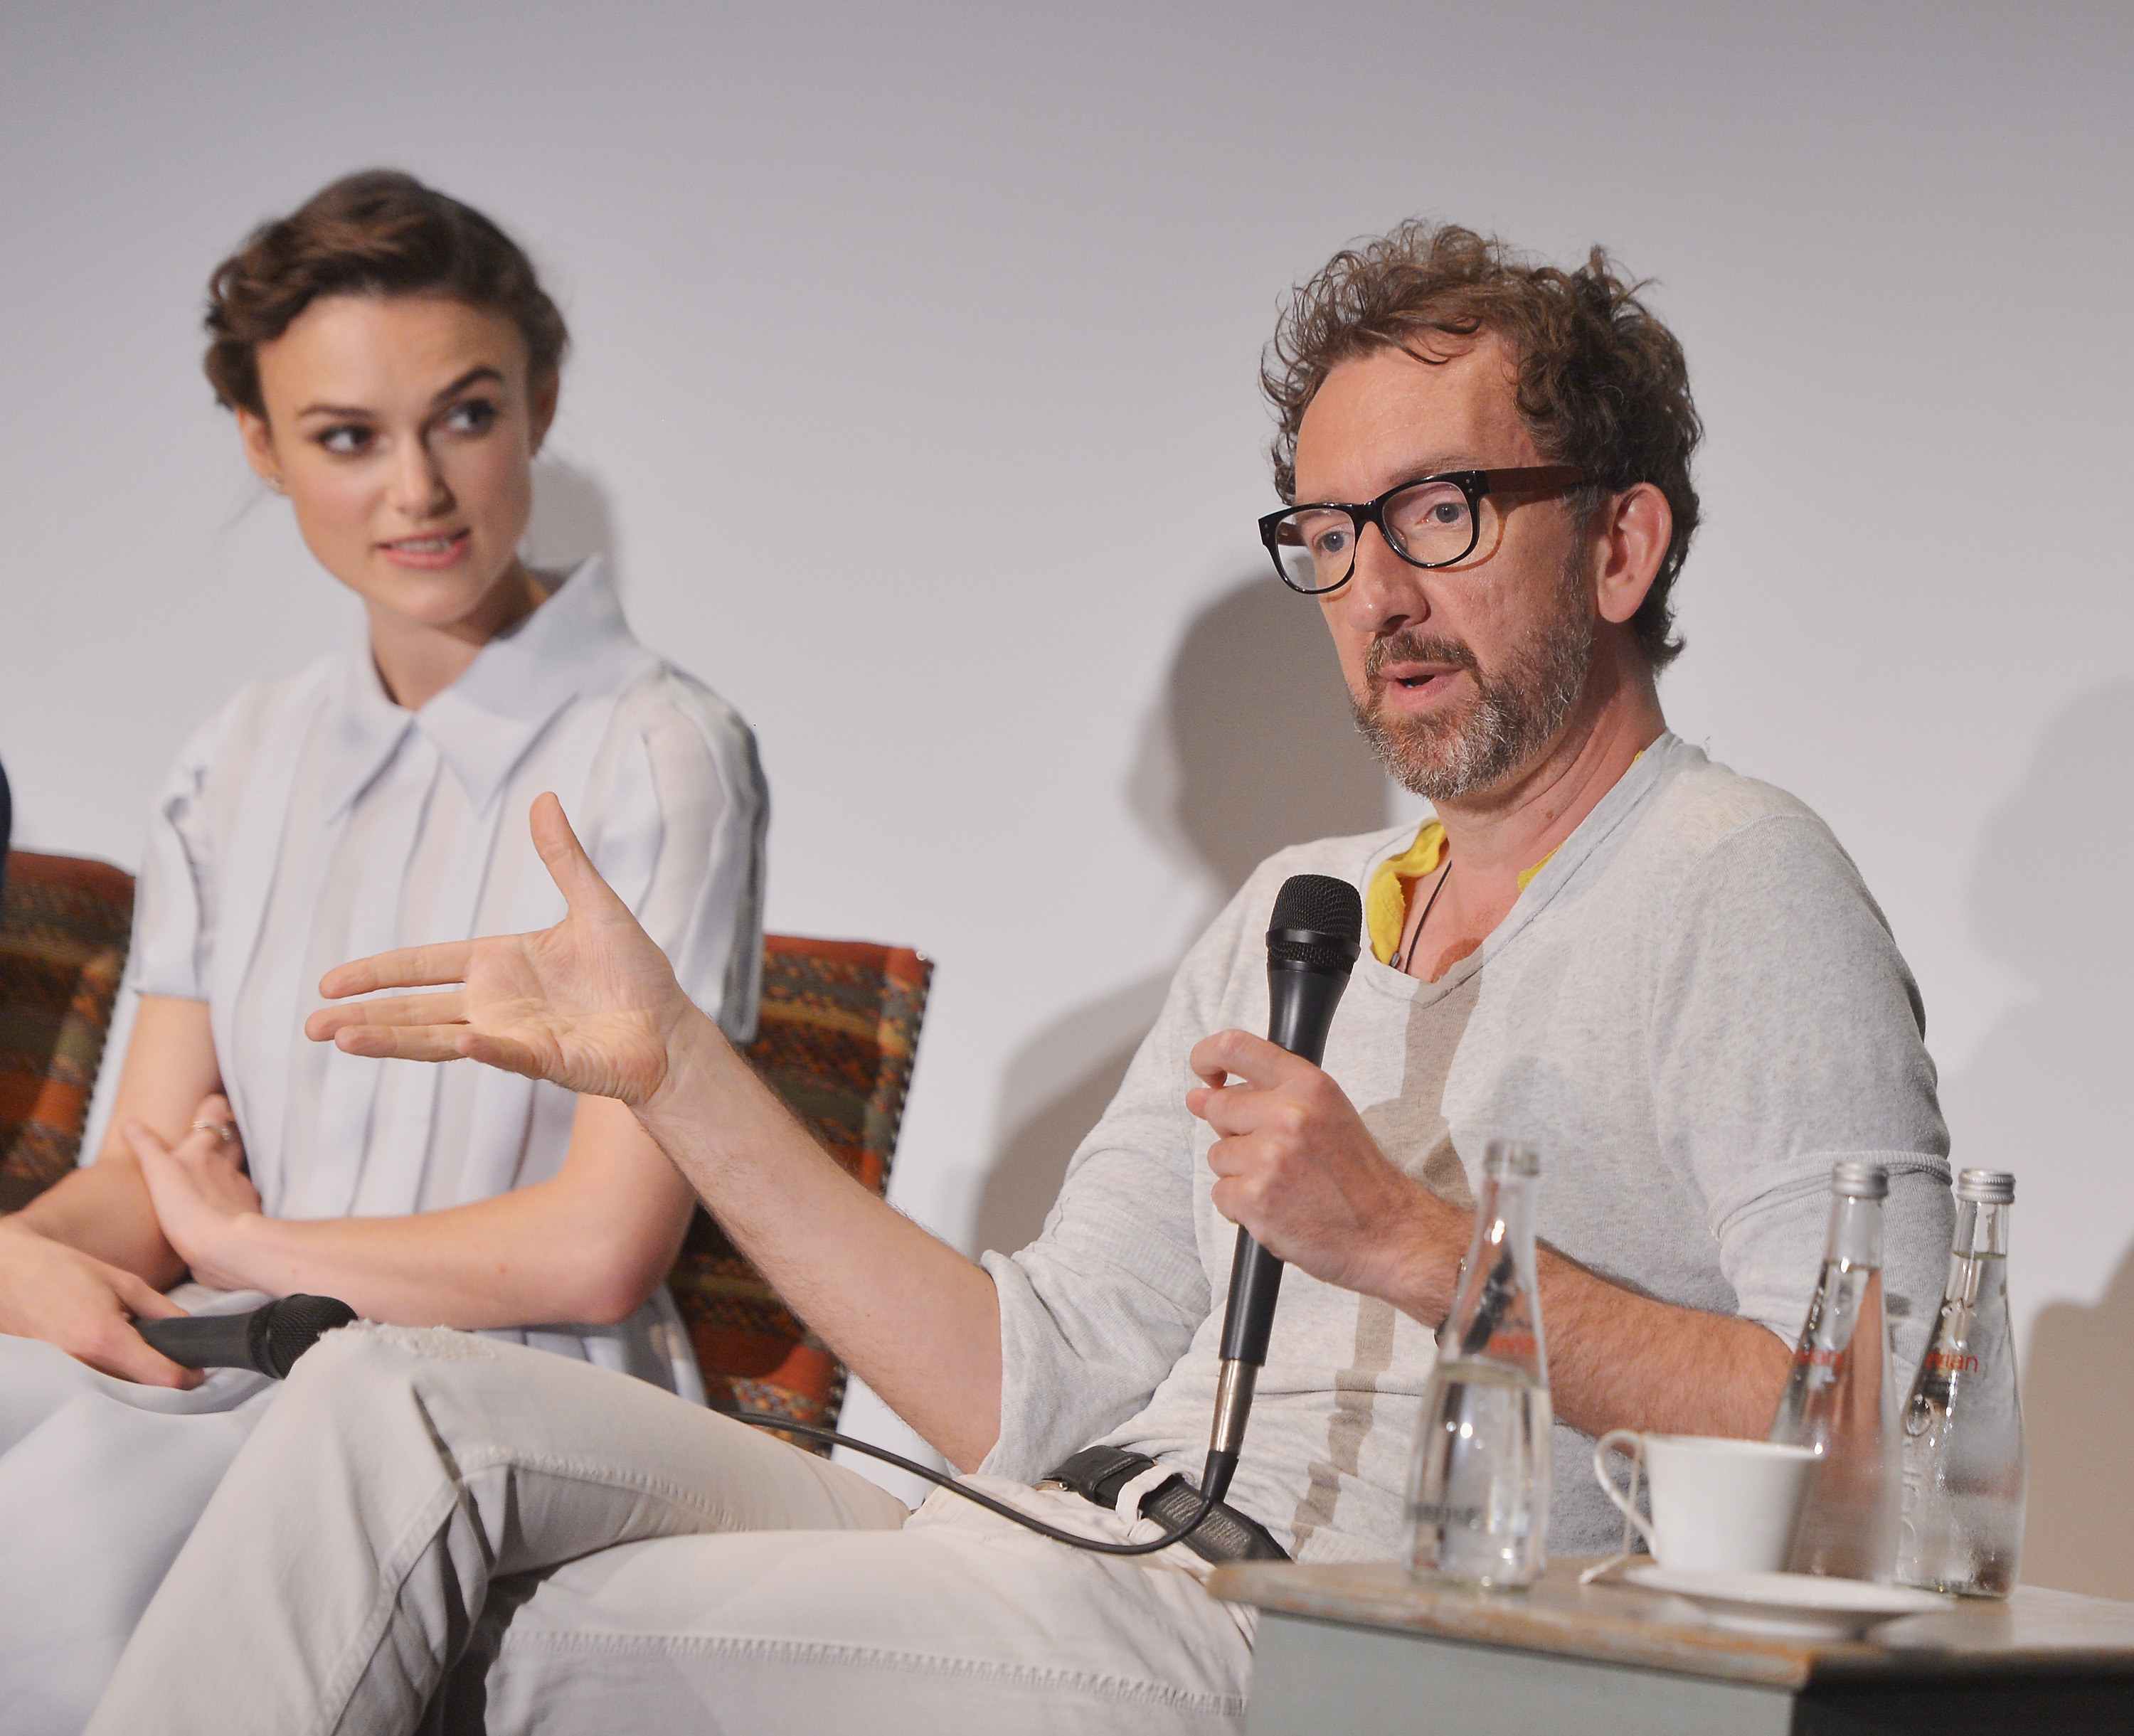 Actress Keira Knightley and writer/director John Carney attend the &quot;Begin Again&quot; press conference at Crosby Street Hotel on June 26, 2014 in New York City